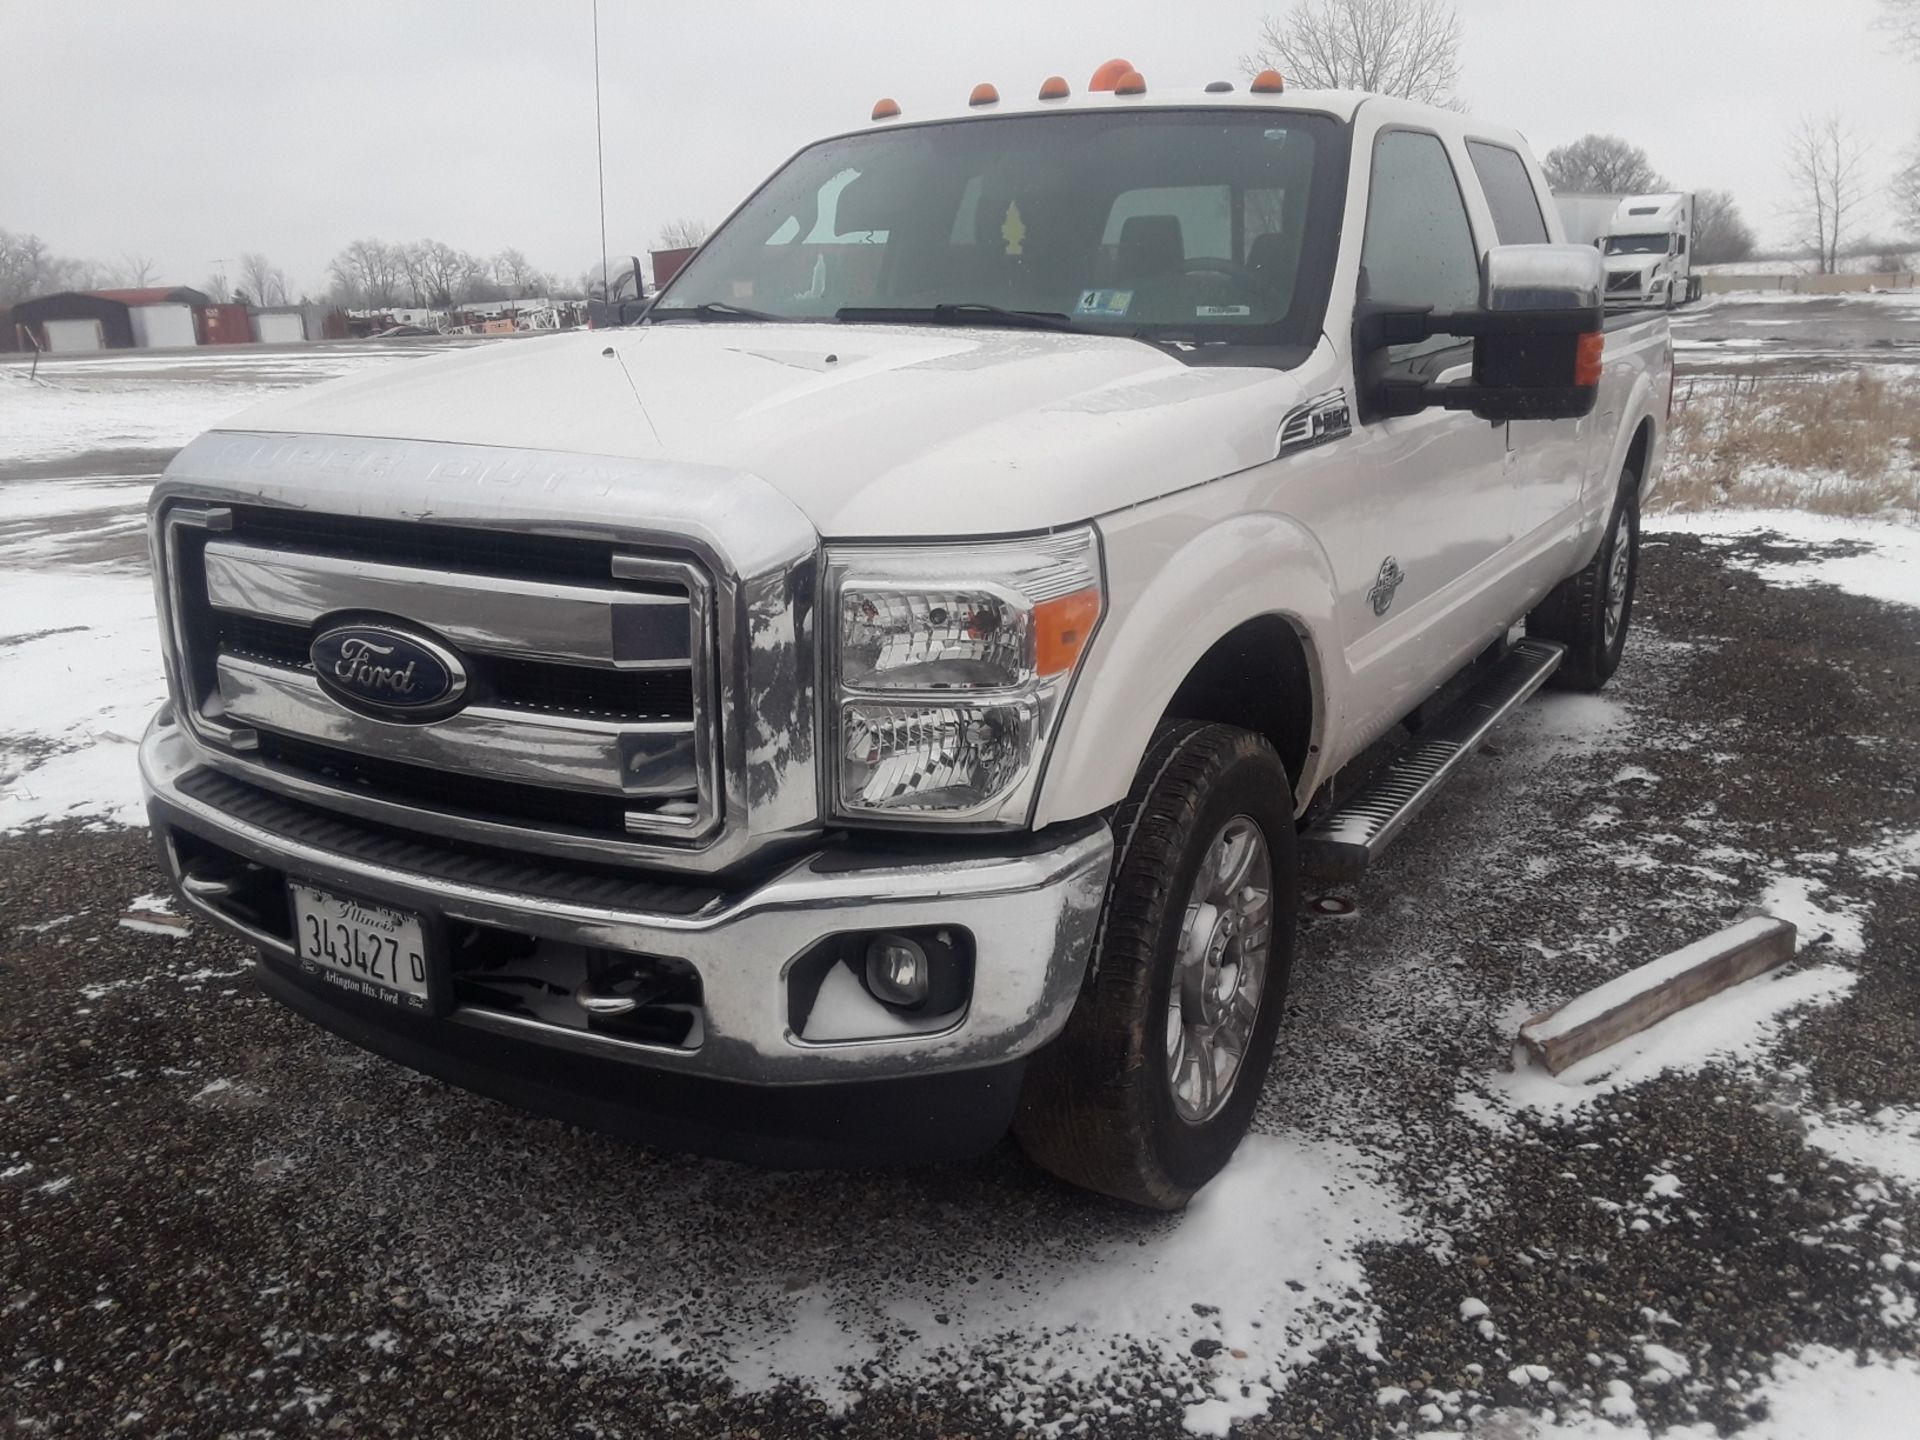 2013 Ford F250 Super Duty Pickup Truck, Extended Cab (VIN: 1FT7W2BT3DEA21899) [Estimate Mileage: - Image 2 of 4